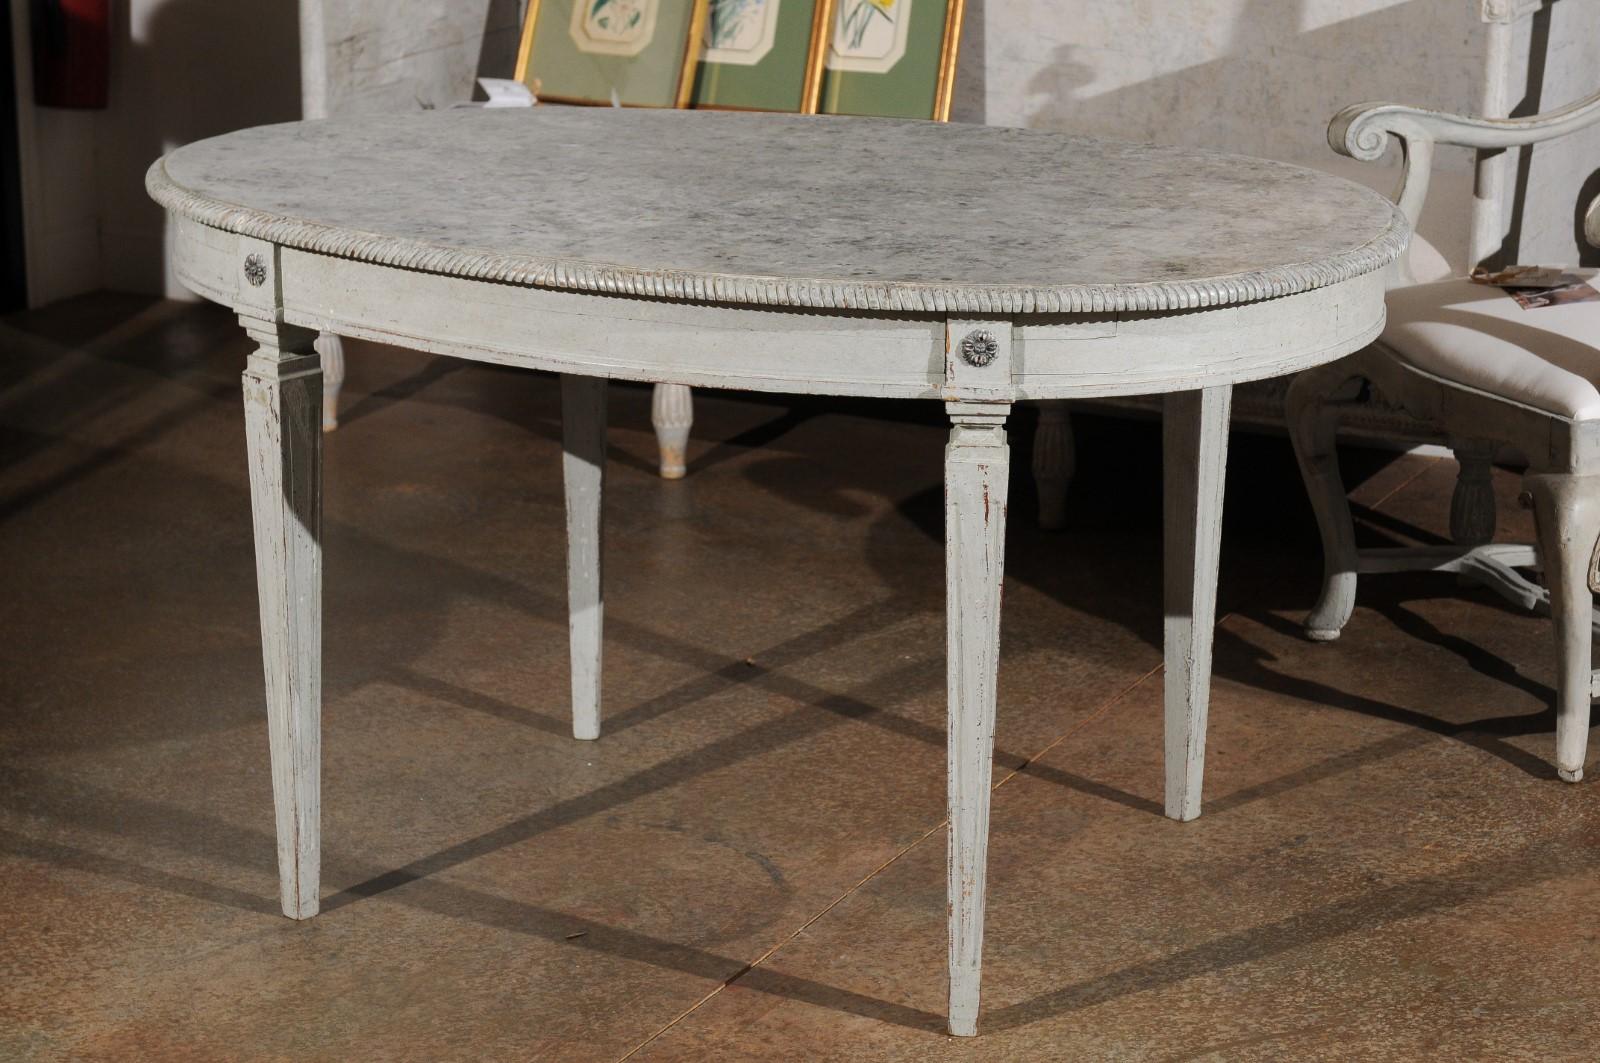 A Swedish grey painted Gustavian style wooden table from the late 19th century, with oval marbleized top, tapered legs, rosettes and distressed finish. Born in Sweden during the later years of the 19th century, this exquisite oval table features the